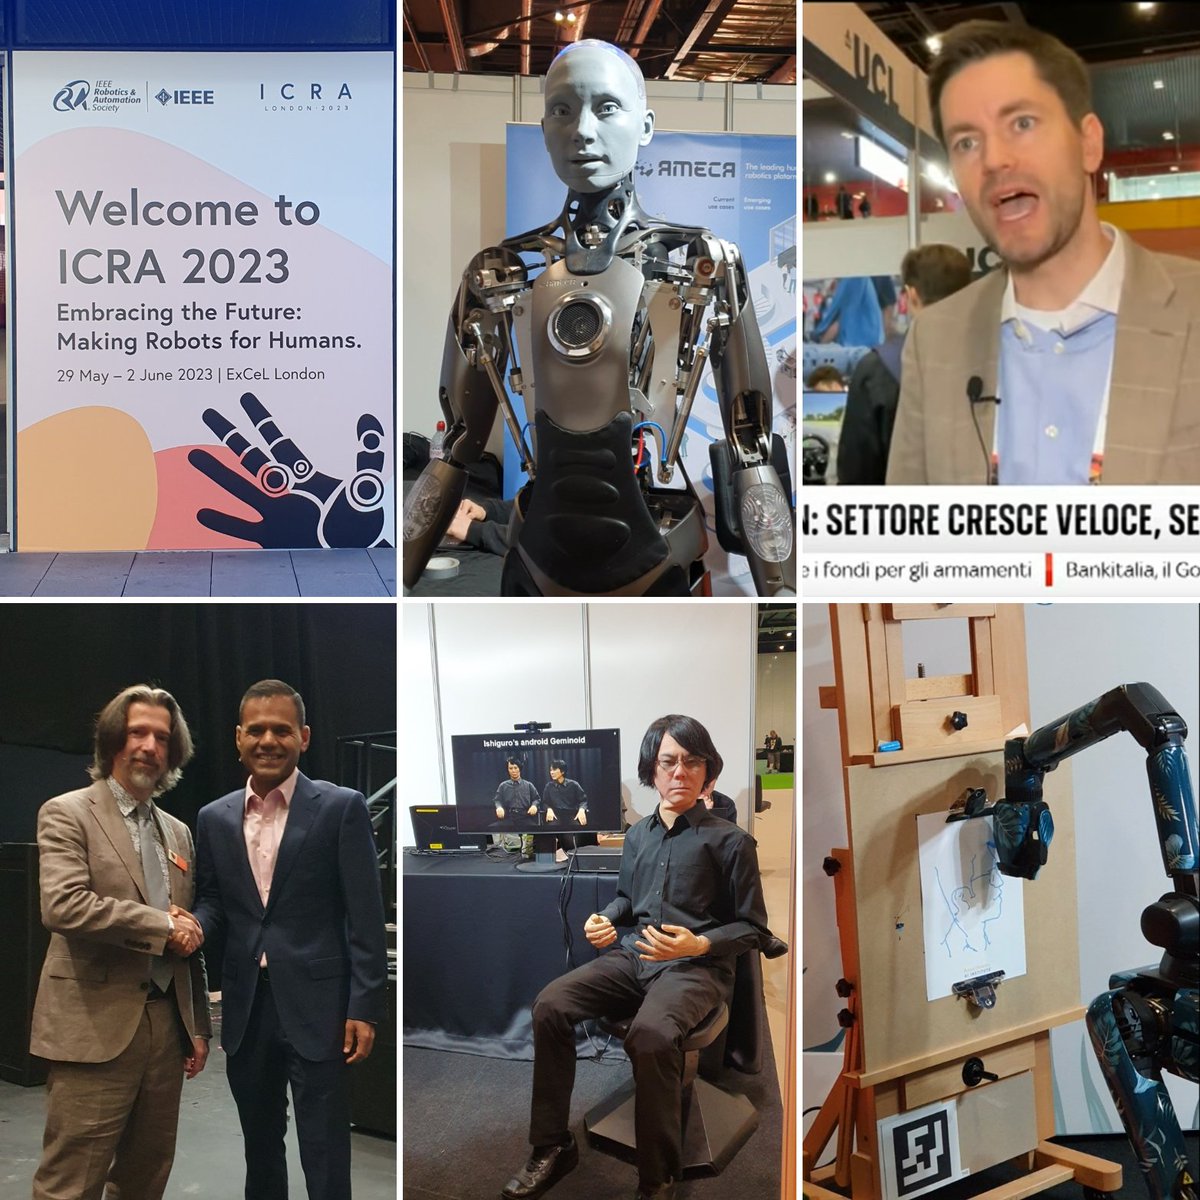 Excited to have finally welcomed #ICRA2023 to London!
After winning the bid 7 years ago, it was inspiring to see thousands of robotics experts gathering at @ExCeLLondon. 
Congratulations to @KasparAlthoefer  @H_Wurdemann and @TFILodestar for an amazing congress!
@ieee_ras_icra